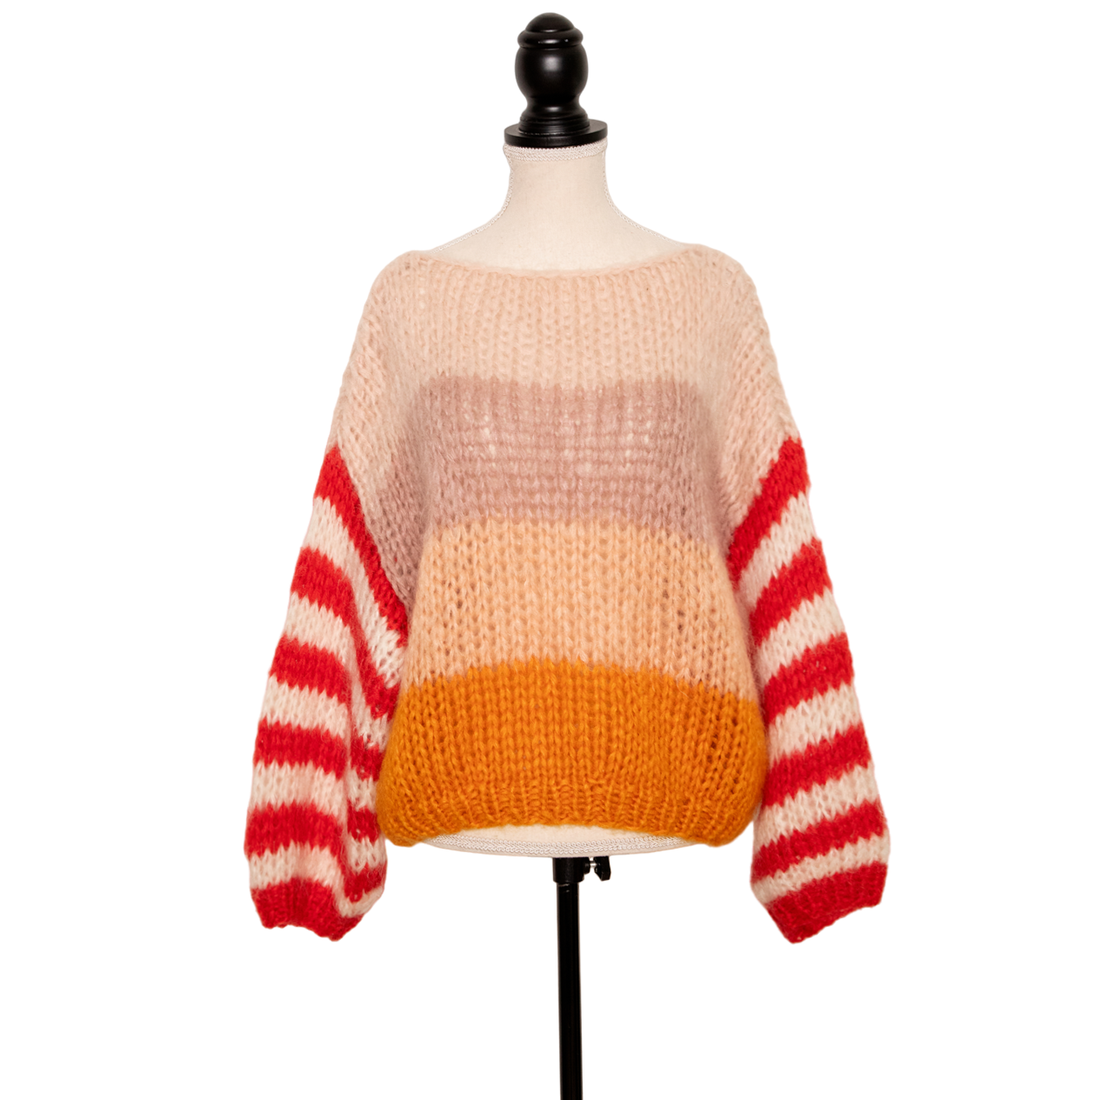 Maiami Basic striped mohair sweater striped